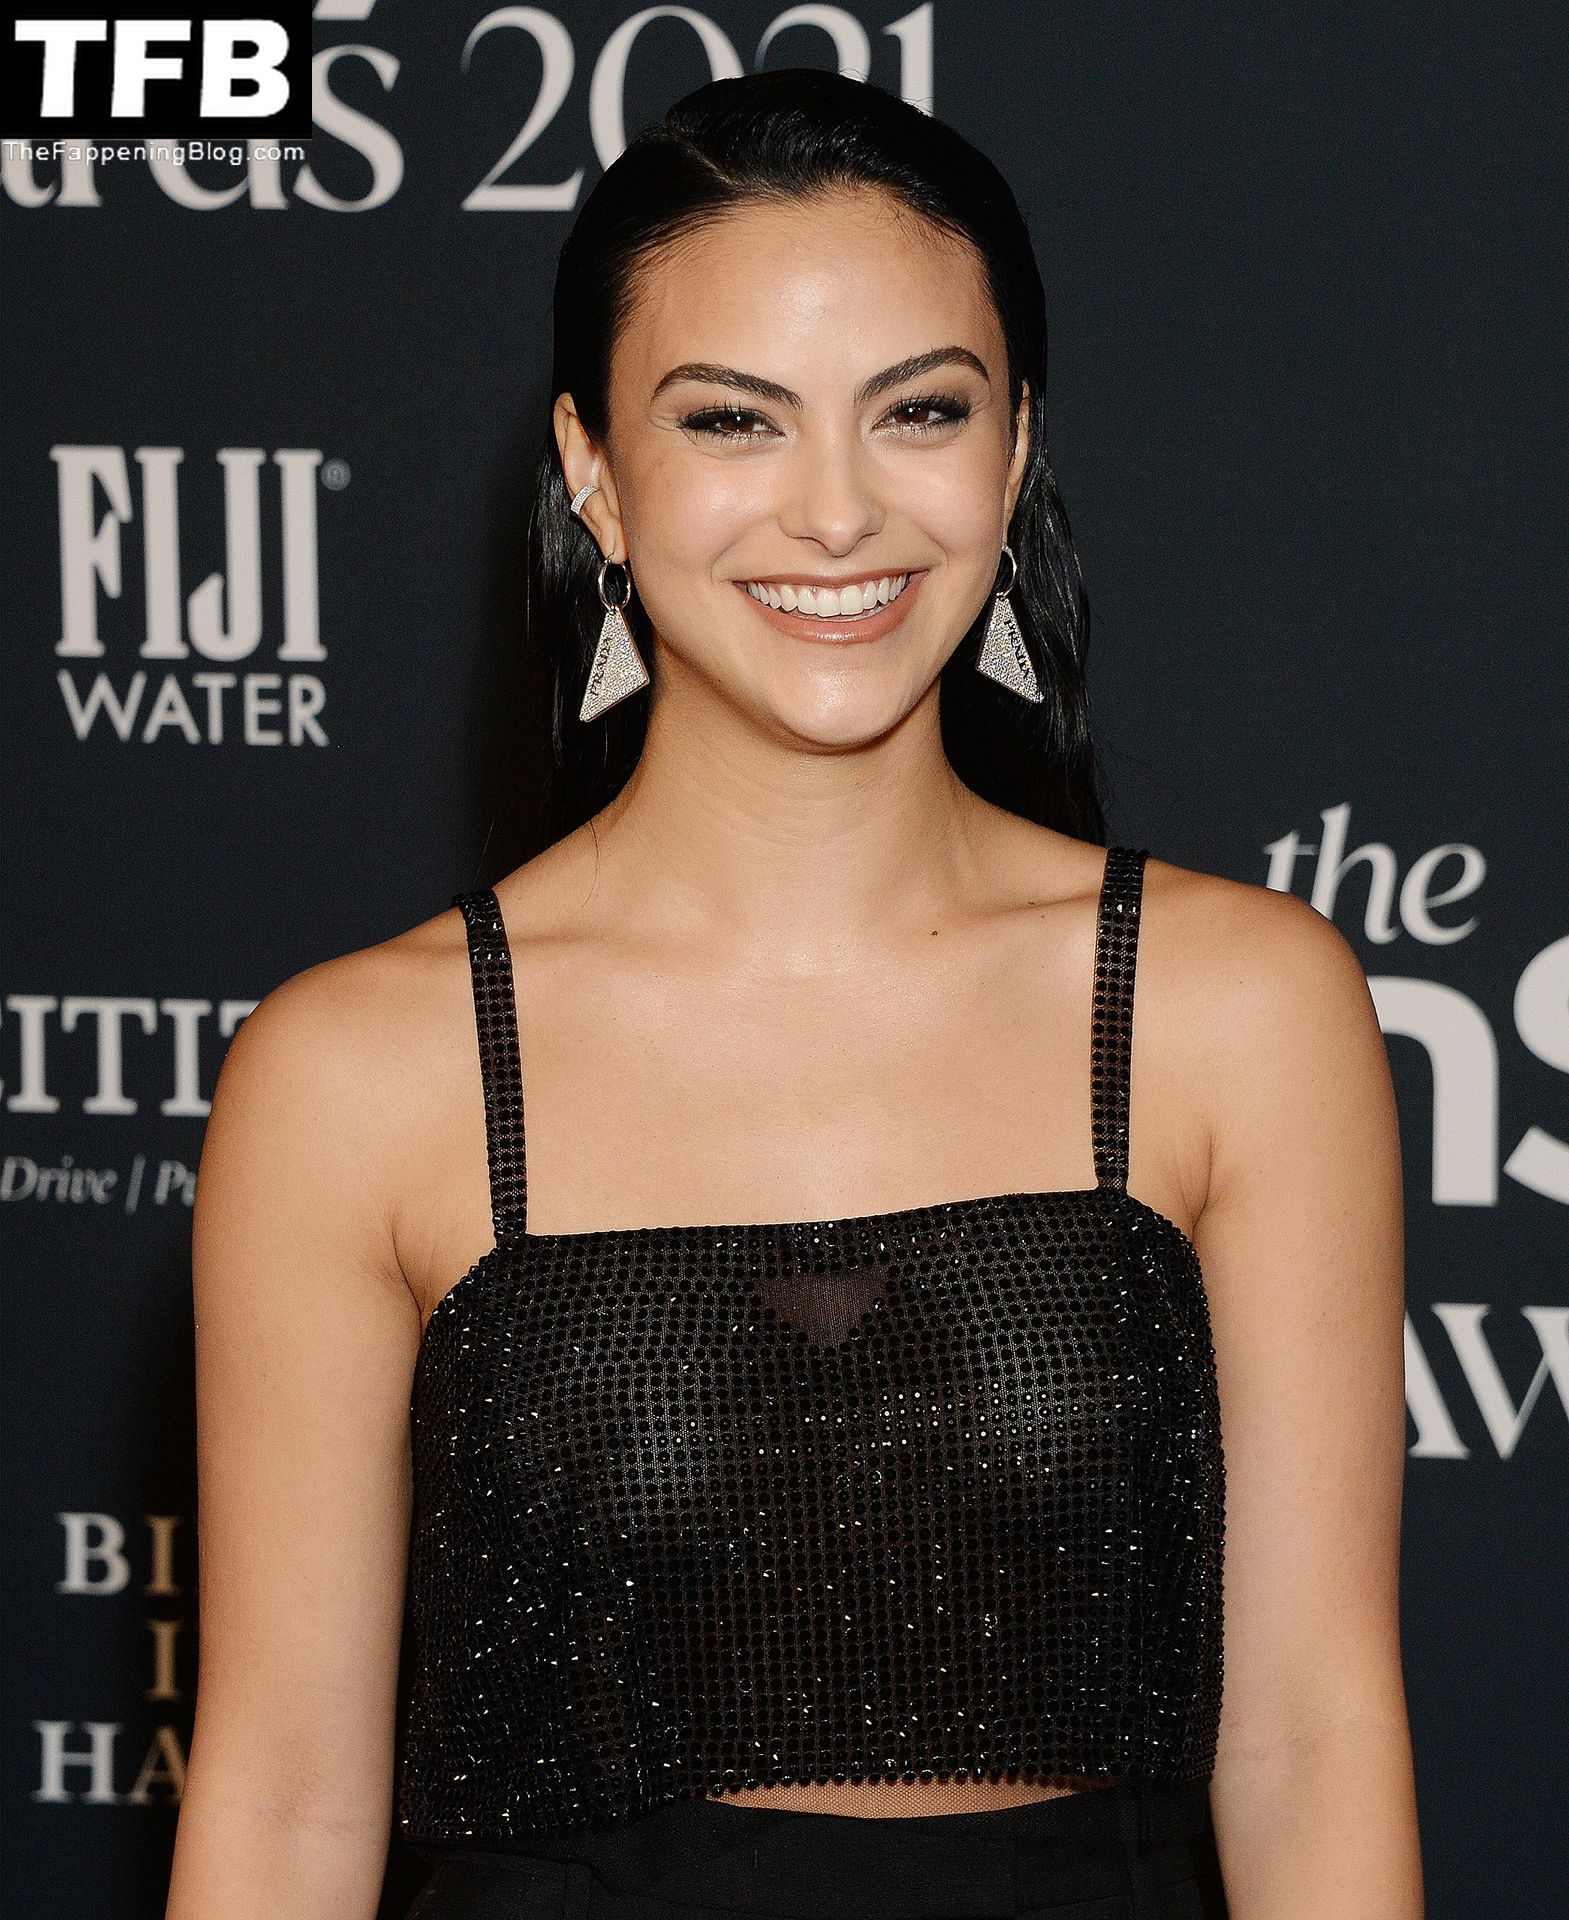 Camila-Mendes-See-Through-Tits-The-Fappening-Blog-55.jpg